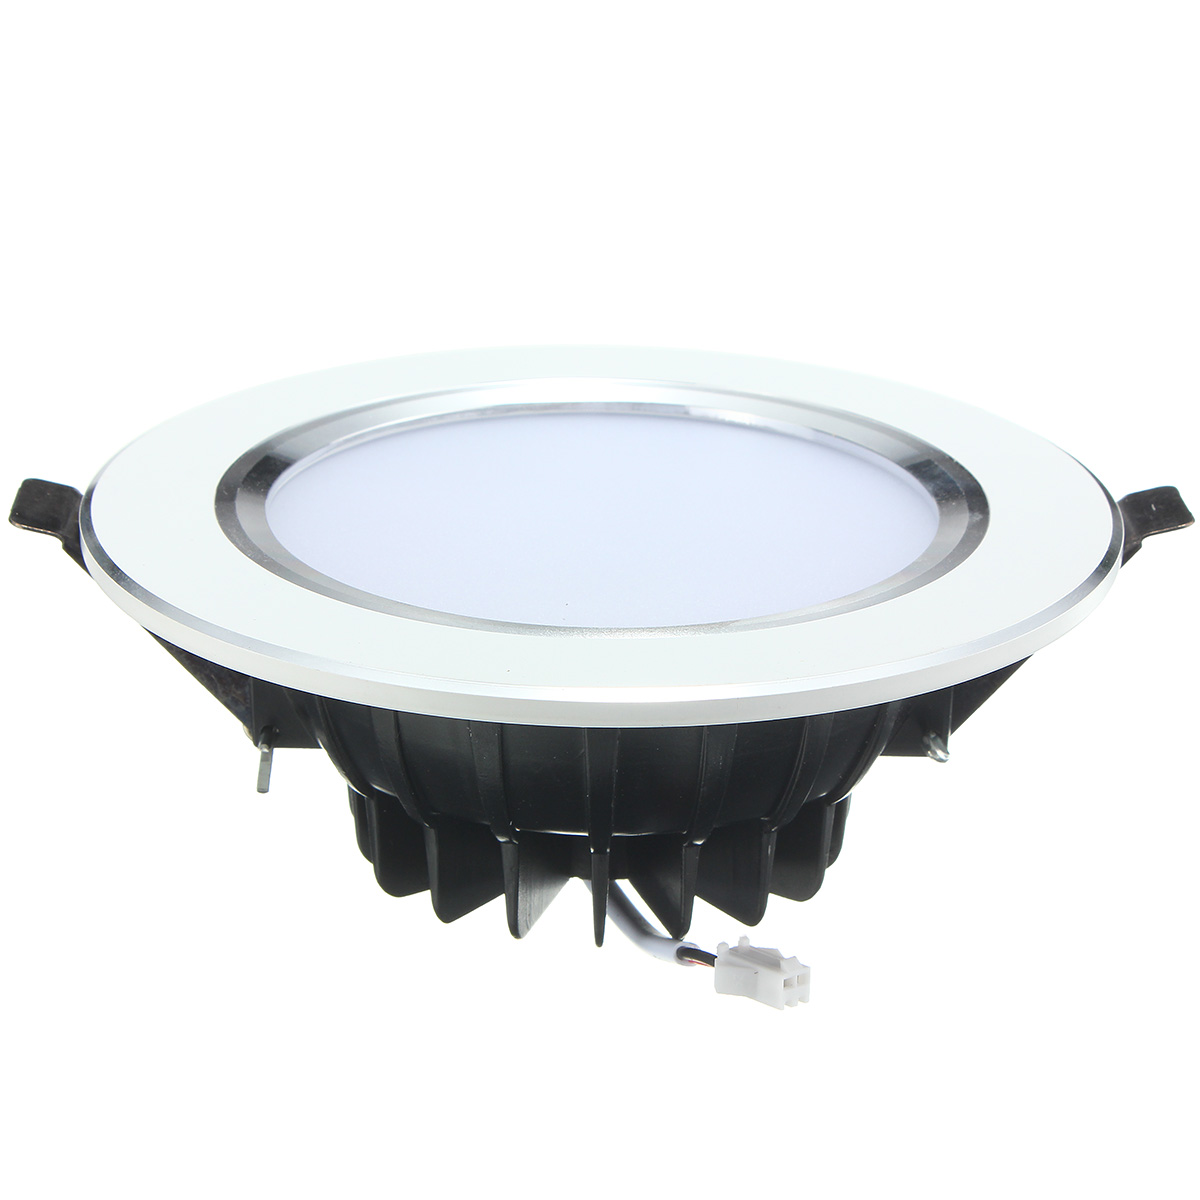 Find 85 265V 12W 5730 24SMD Low Power Ceiling Lamp Warm White/White Light for Bedroom Dining Room Kitchen for Sale on Gipsybee.com with cryptocurrencies